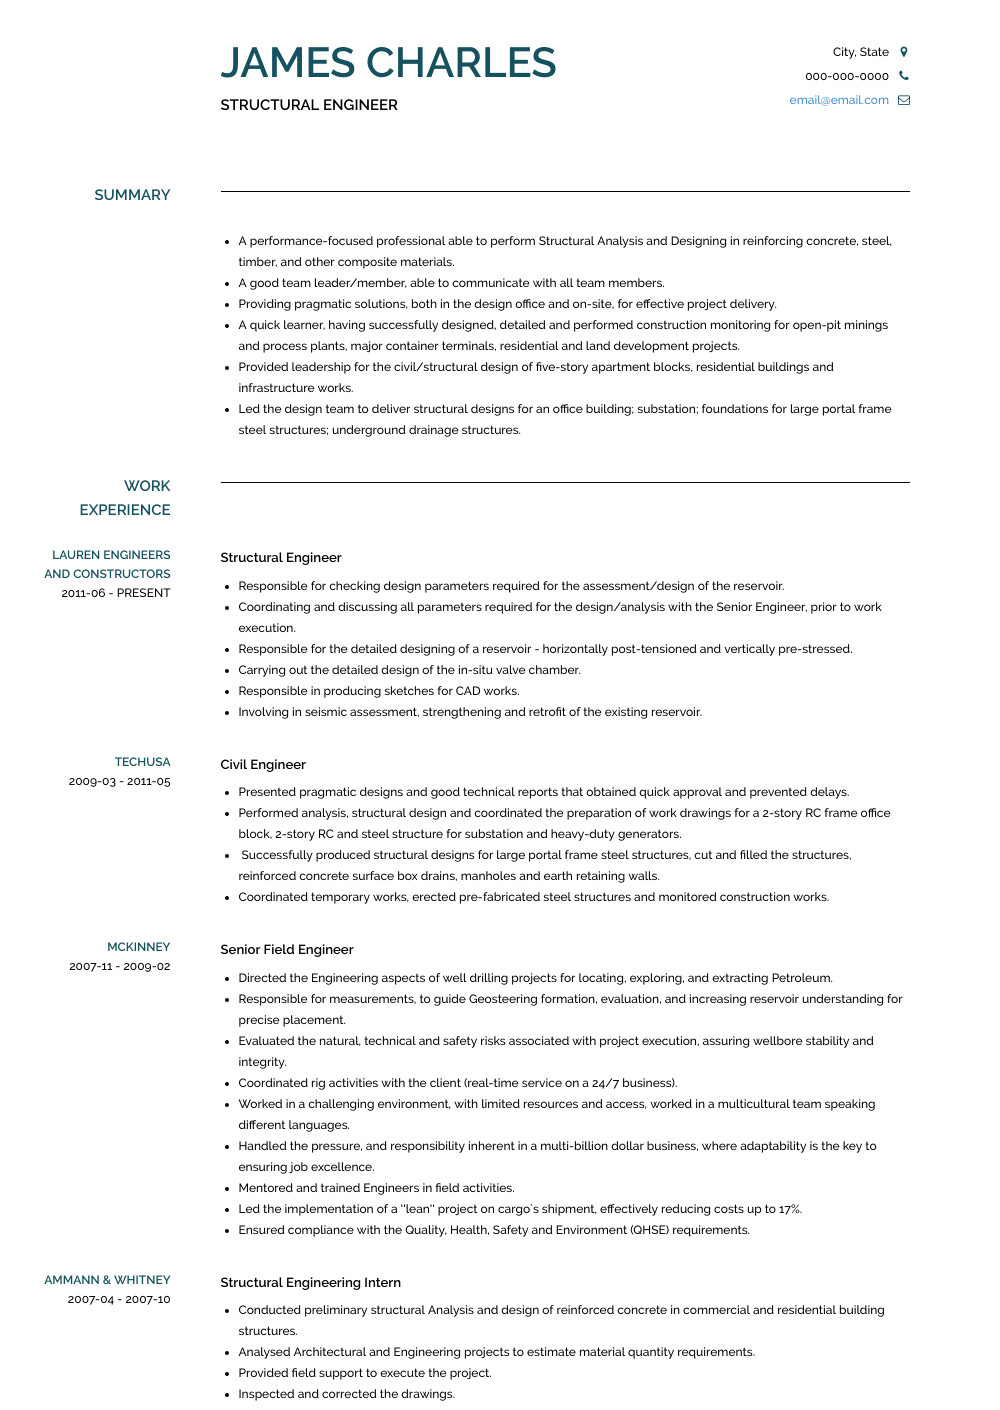 Structural Engineer Resume Structural Engineer Resume Samples and Templates Visualcv